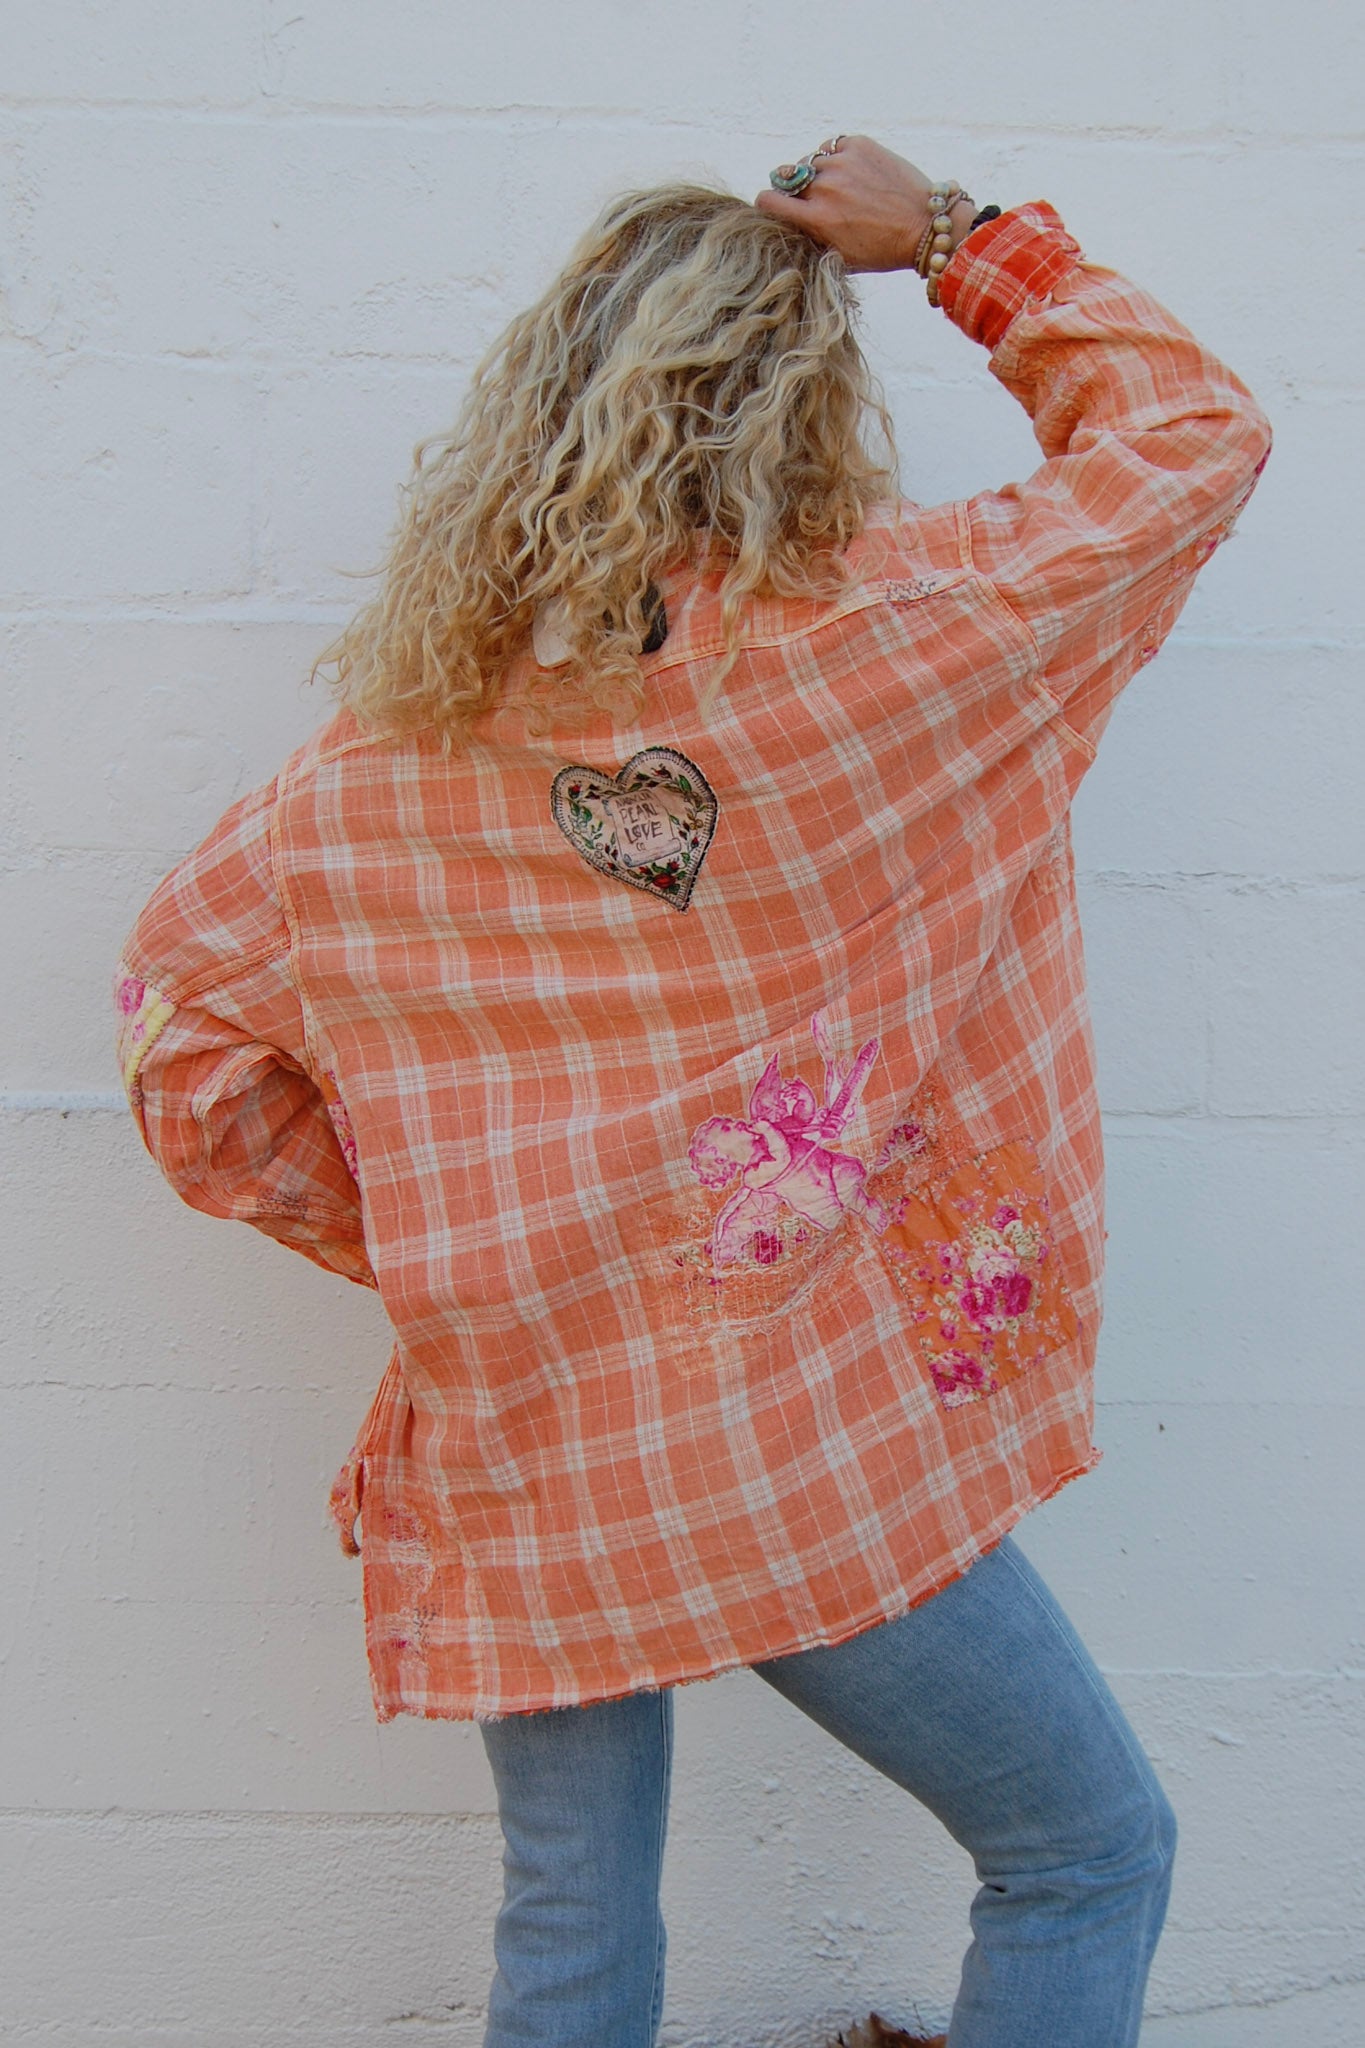 Load image into Gallery viewer, Magnolia Pearl Le Brun Cropped Tuxedo Jacket in Amber Royale - SpiritedBoutiques Boho Hippie Boutique Style Jacket, Magnolia Pearl
